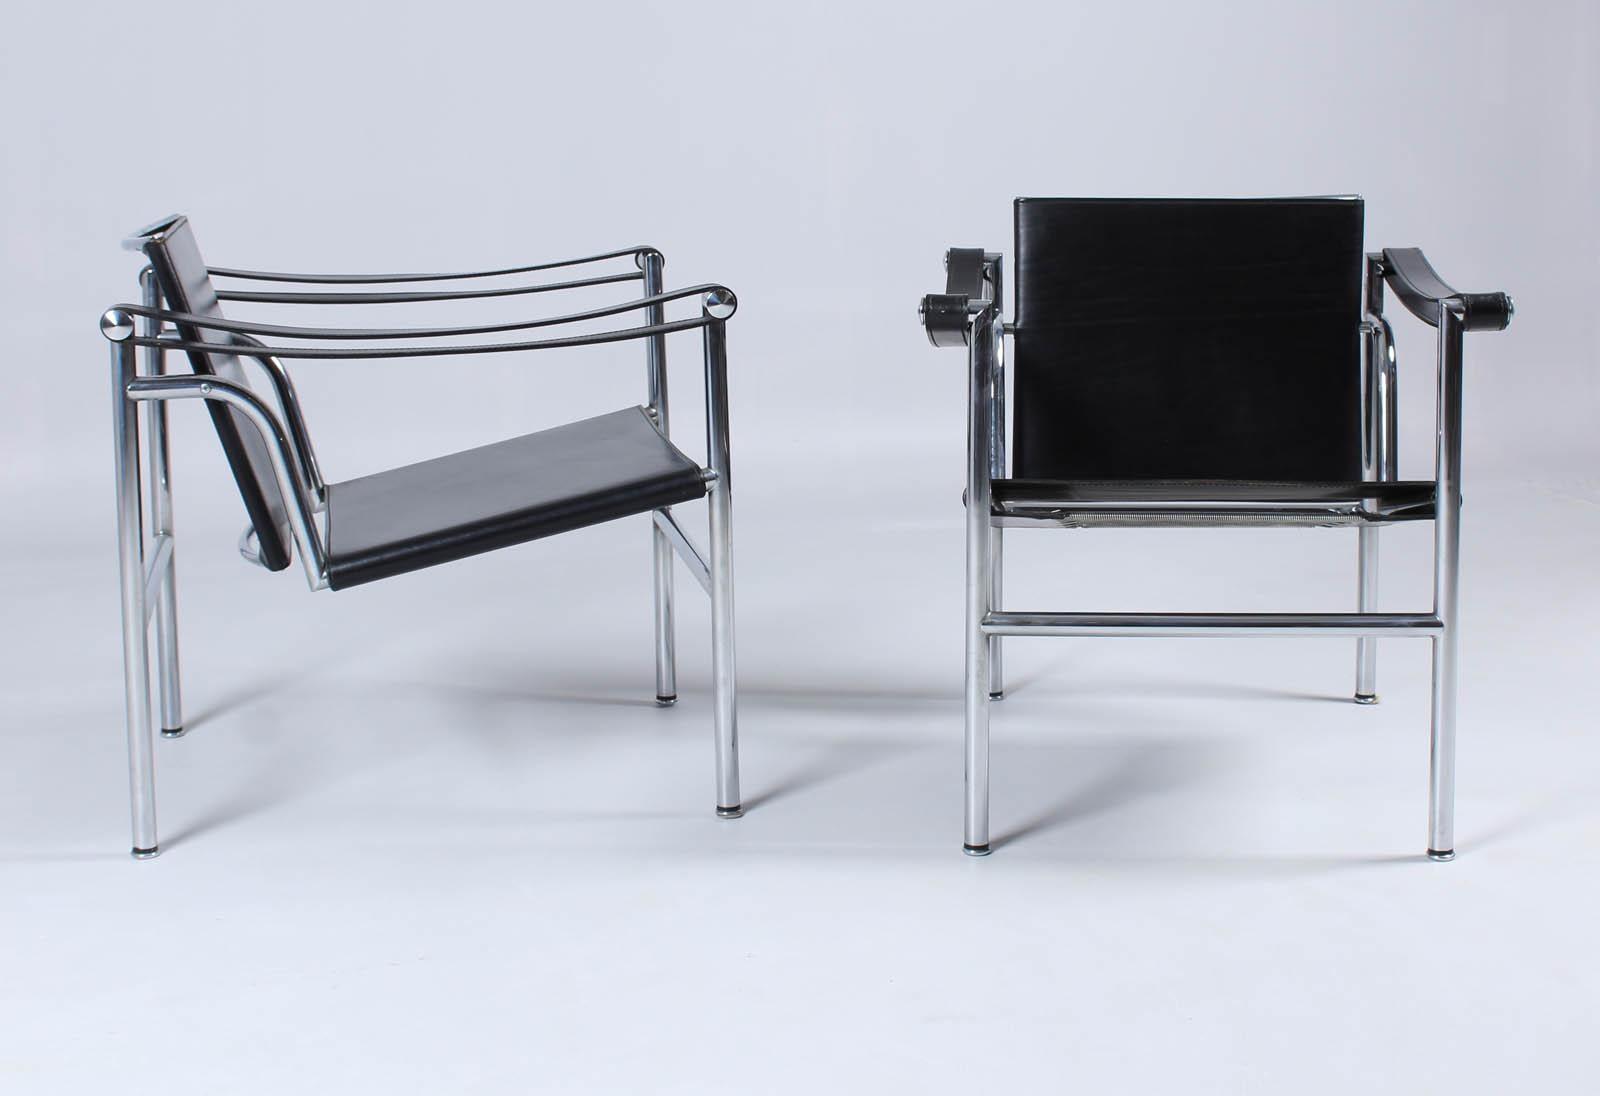 On offer are two armchairs LC1 by Cassina from 1982. For both armchairs still exist the original papers with the serial numbers 21764 and 22158.
The leather has age-related traces of use and is in good, well-kept condition.
The tubular steel is